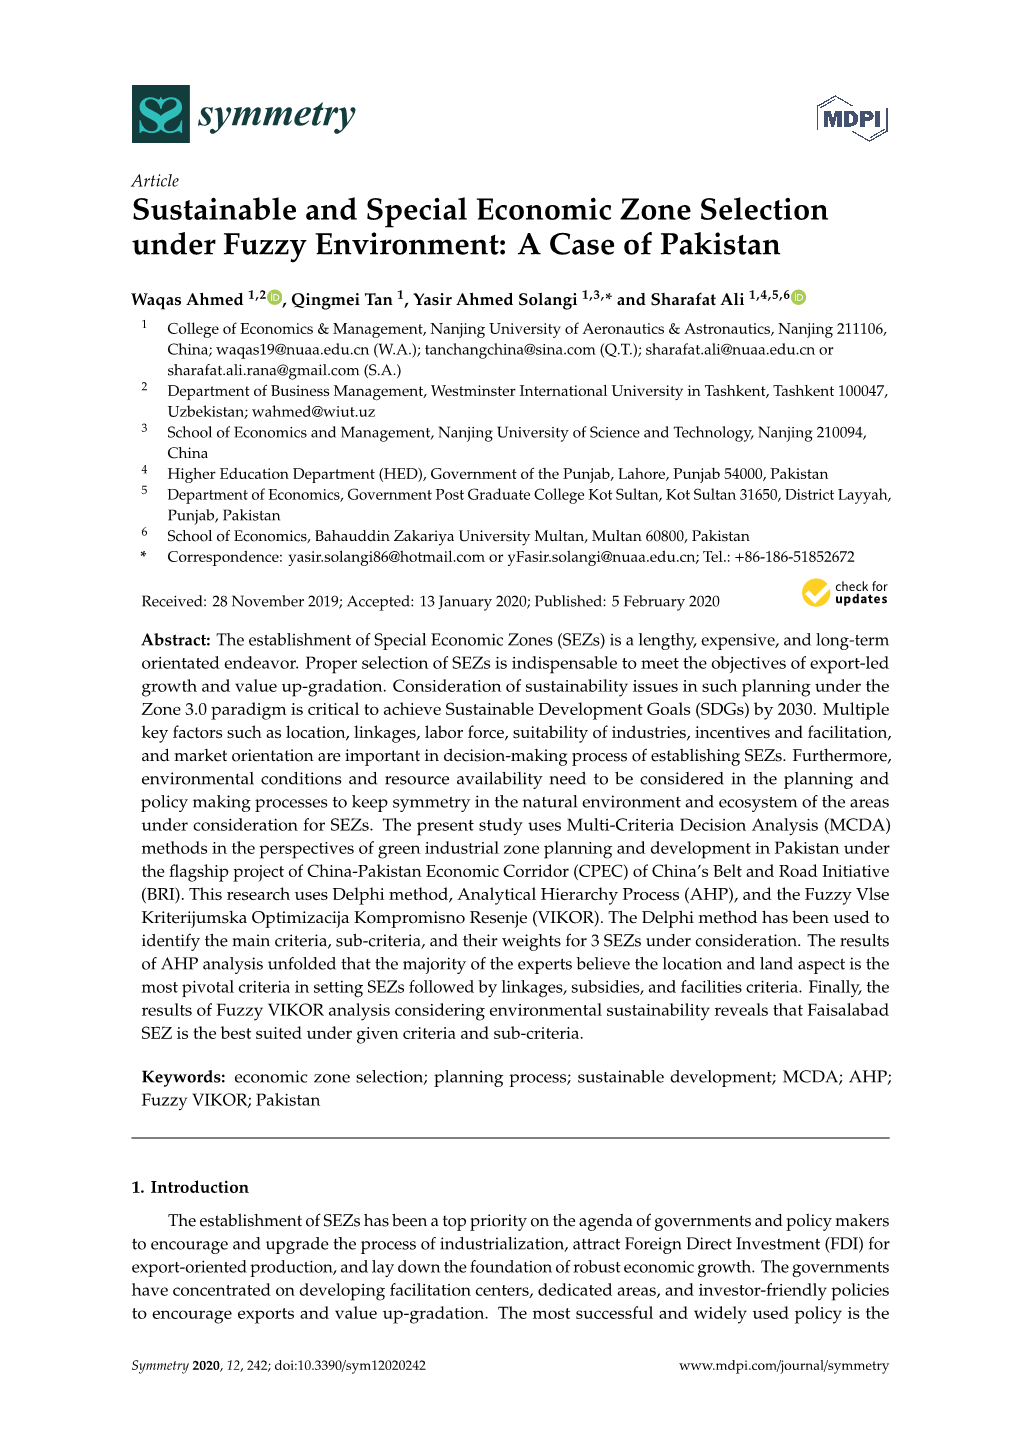 Sustainable and Special Economic Zone Selection Under Fuzzy Environment: a Case of Pakistan